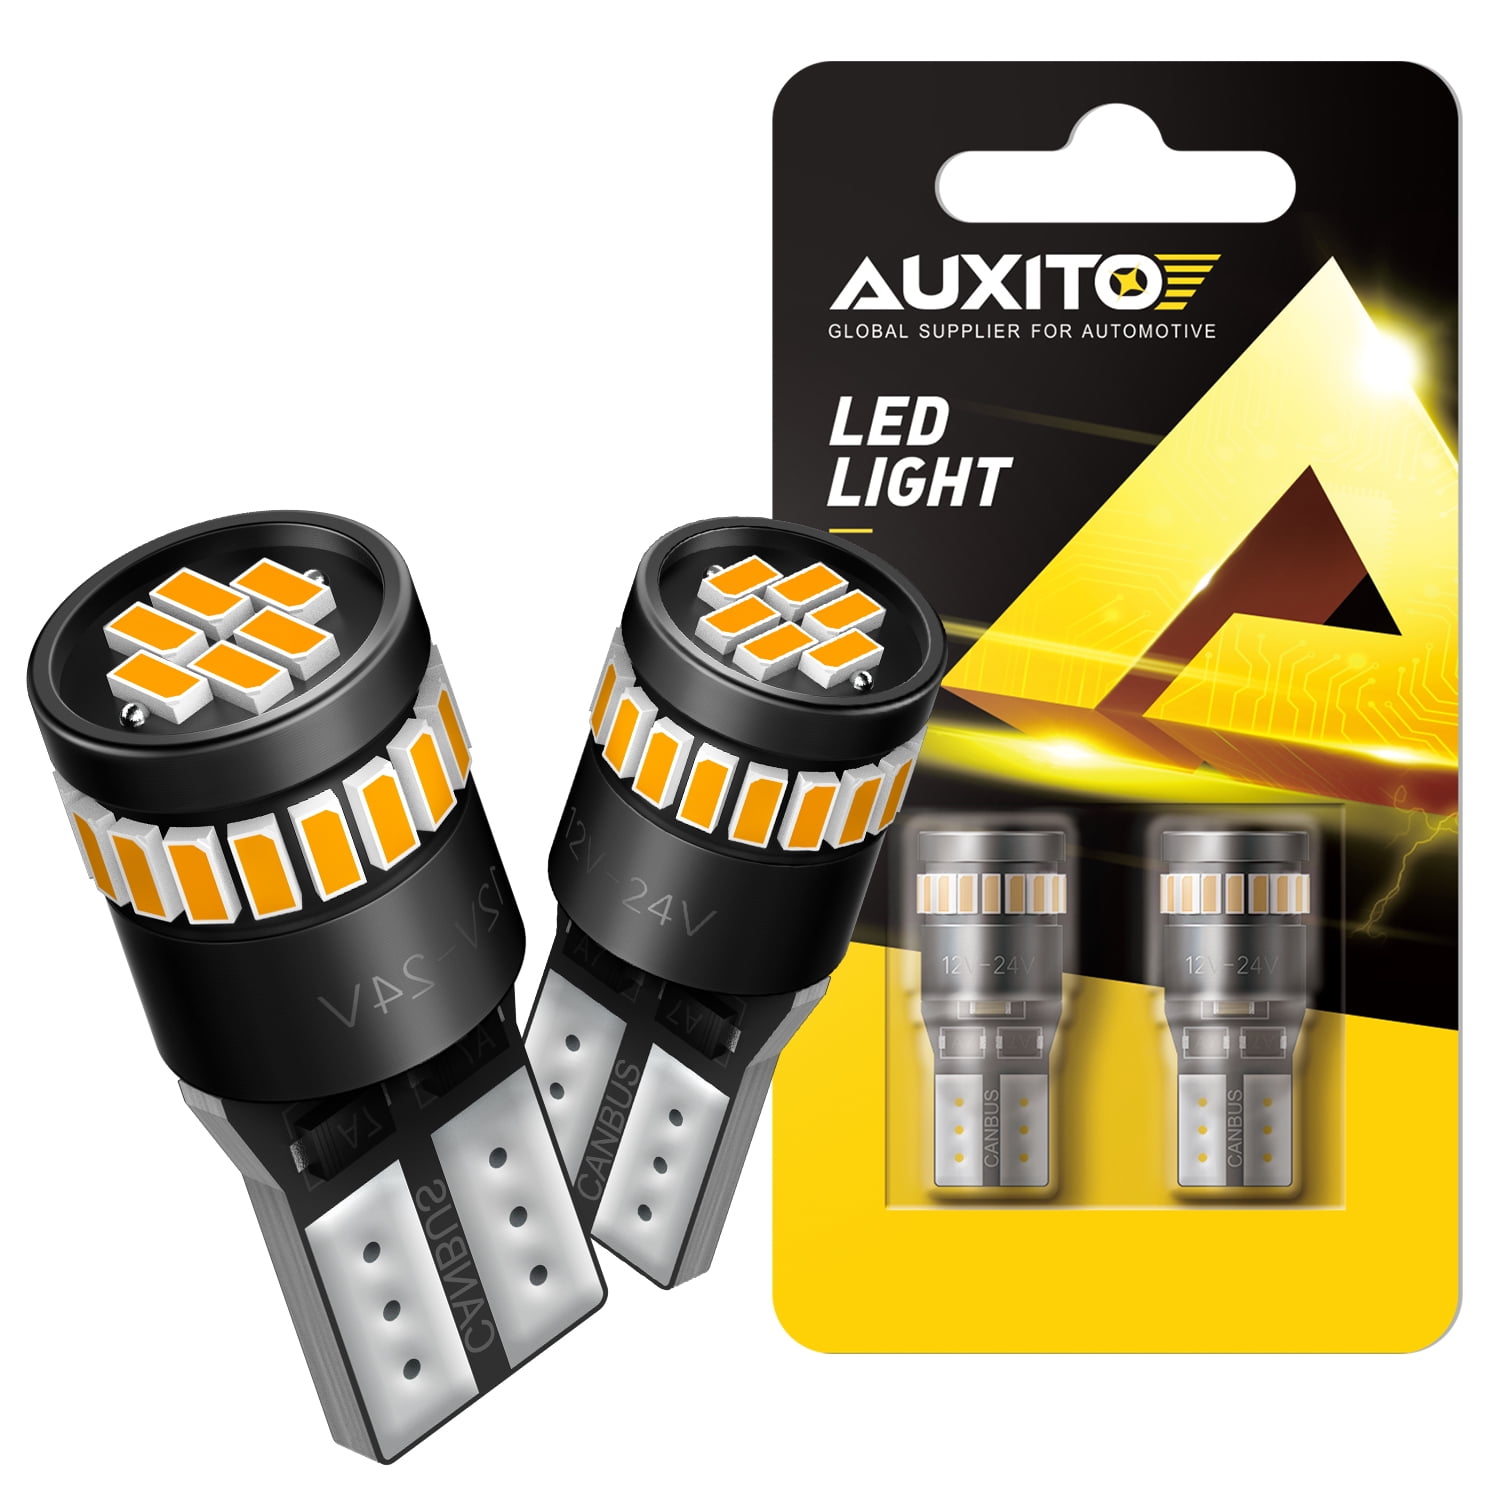 AUXITO T10 Wedge 194 168 2825 Yellow Amber LED Turn Signal Marker Light Bulbs 2x 